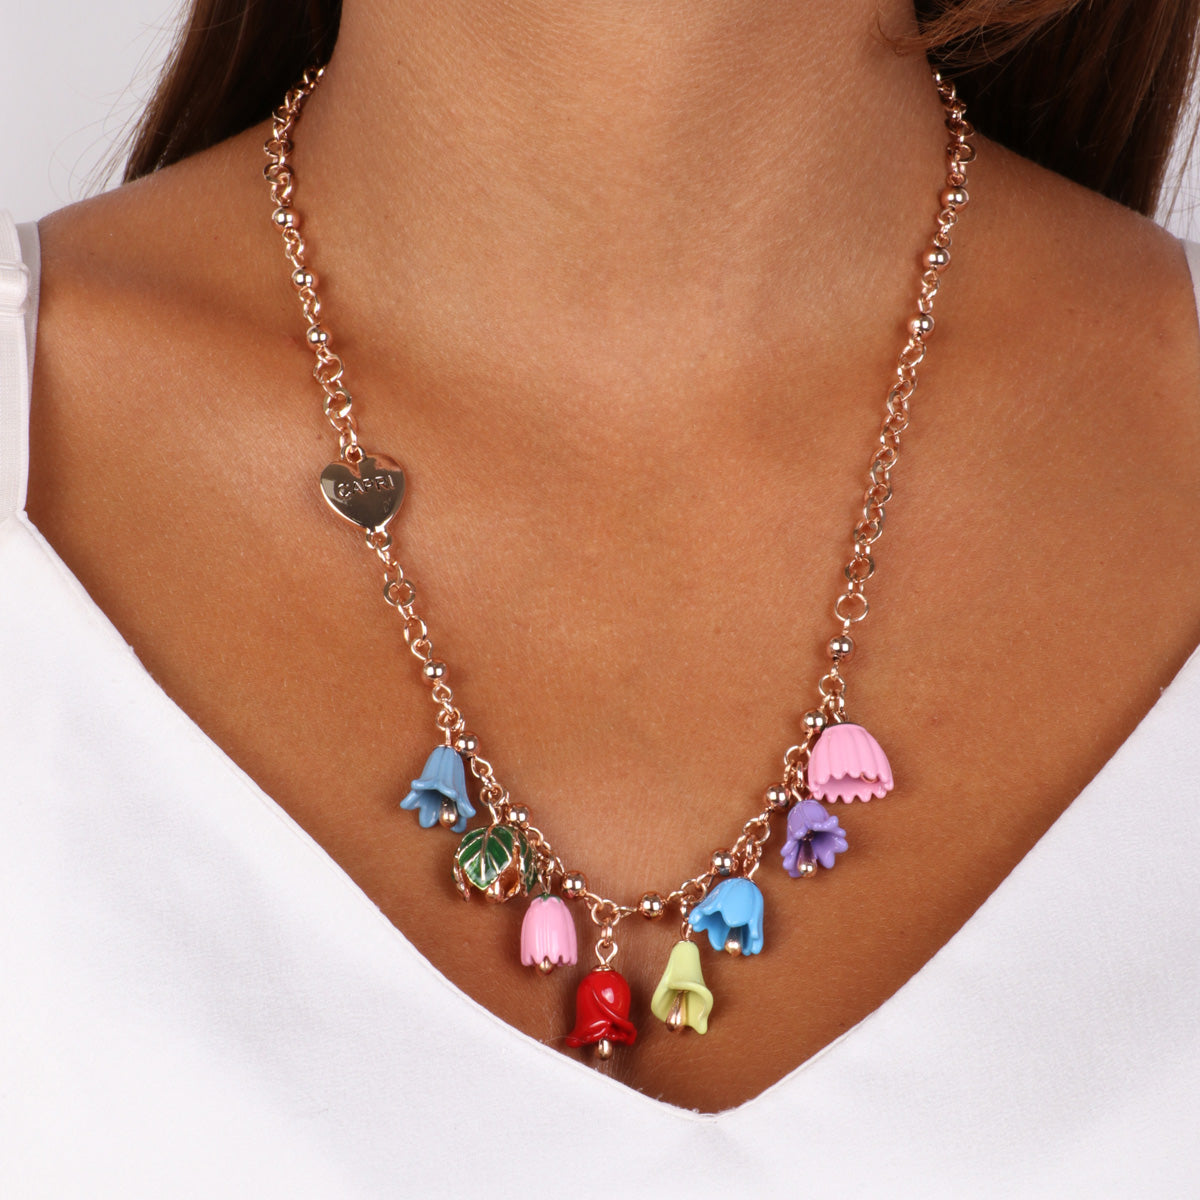 Metal necklace with floral campenelle and heart -shaped detail with Capri writing